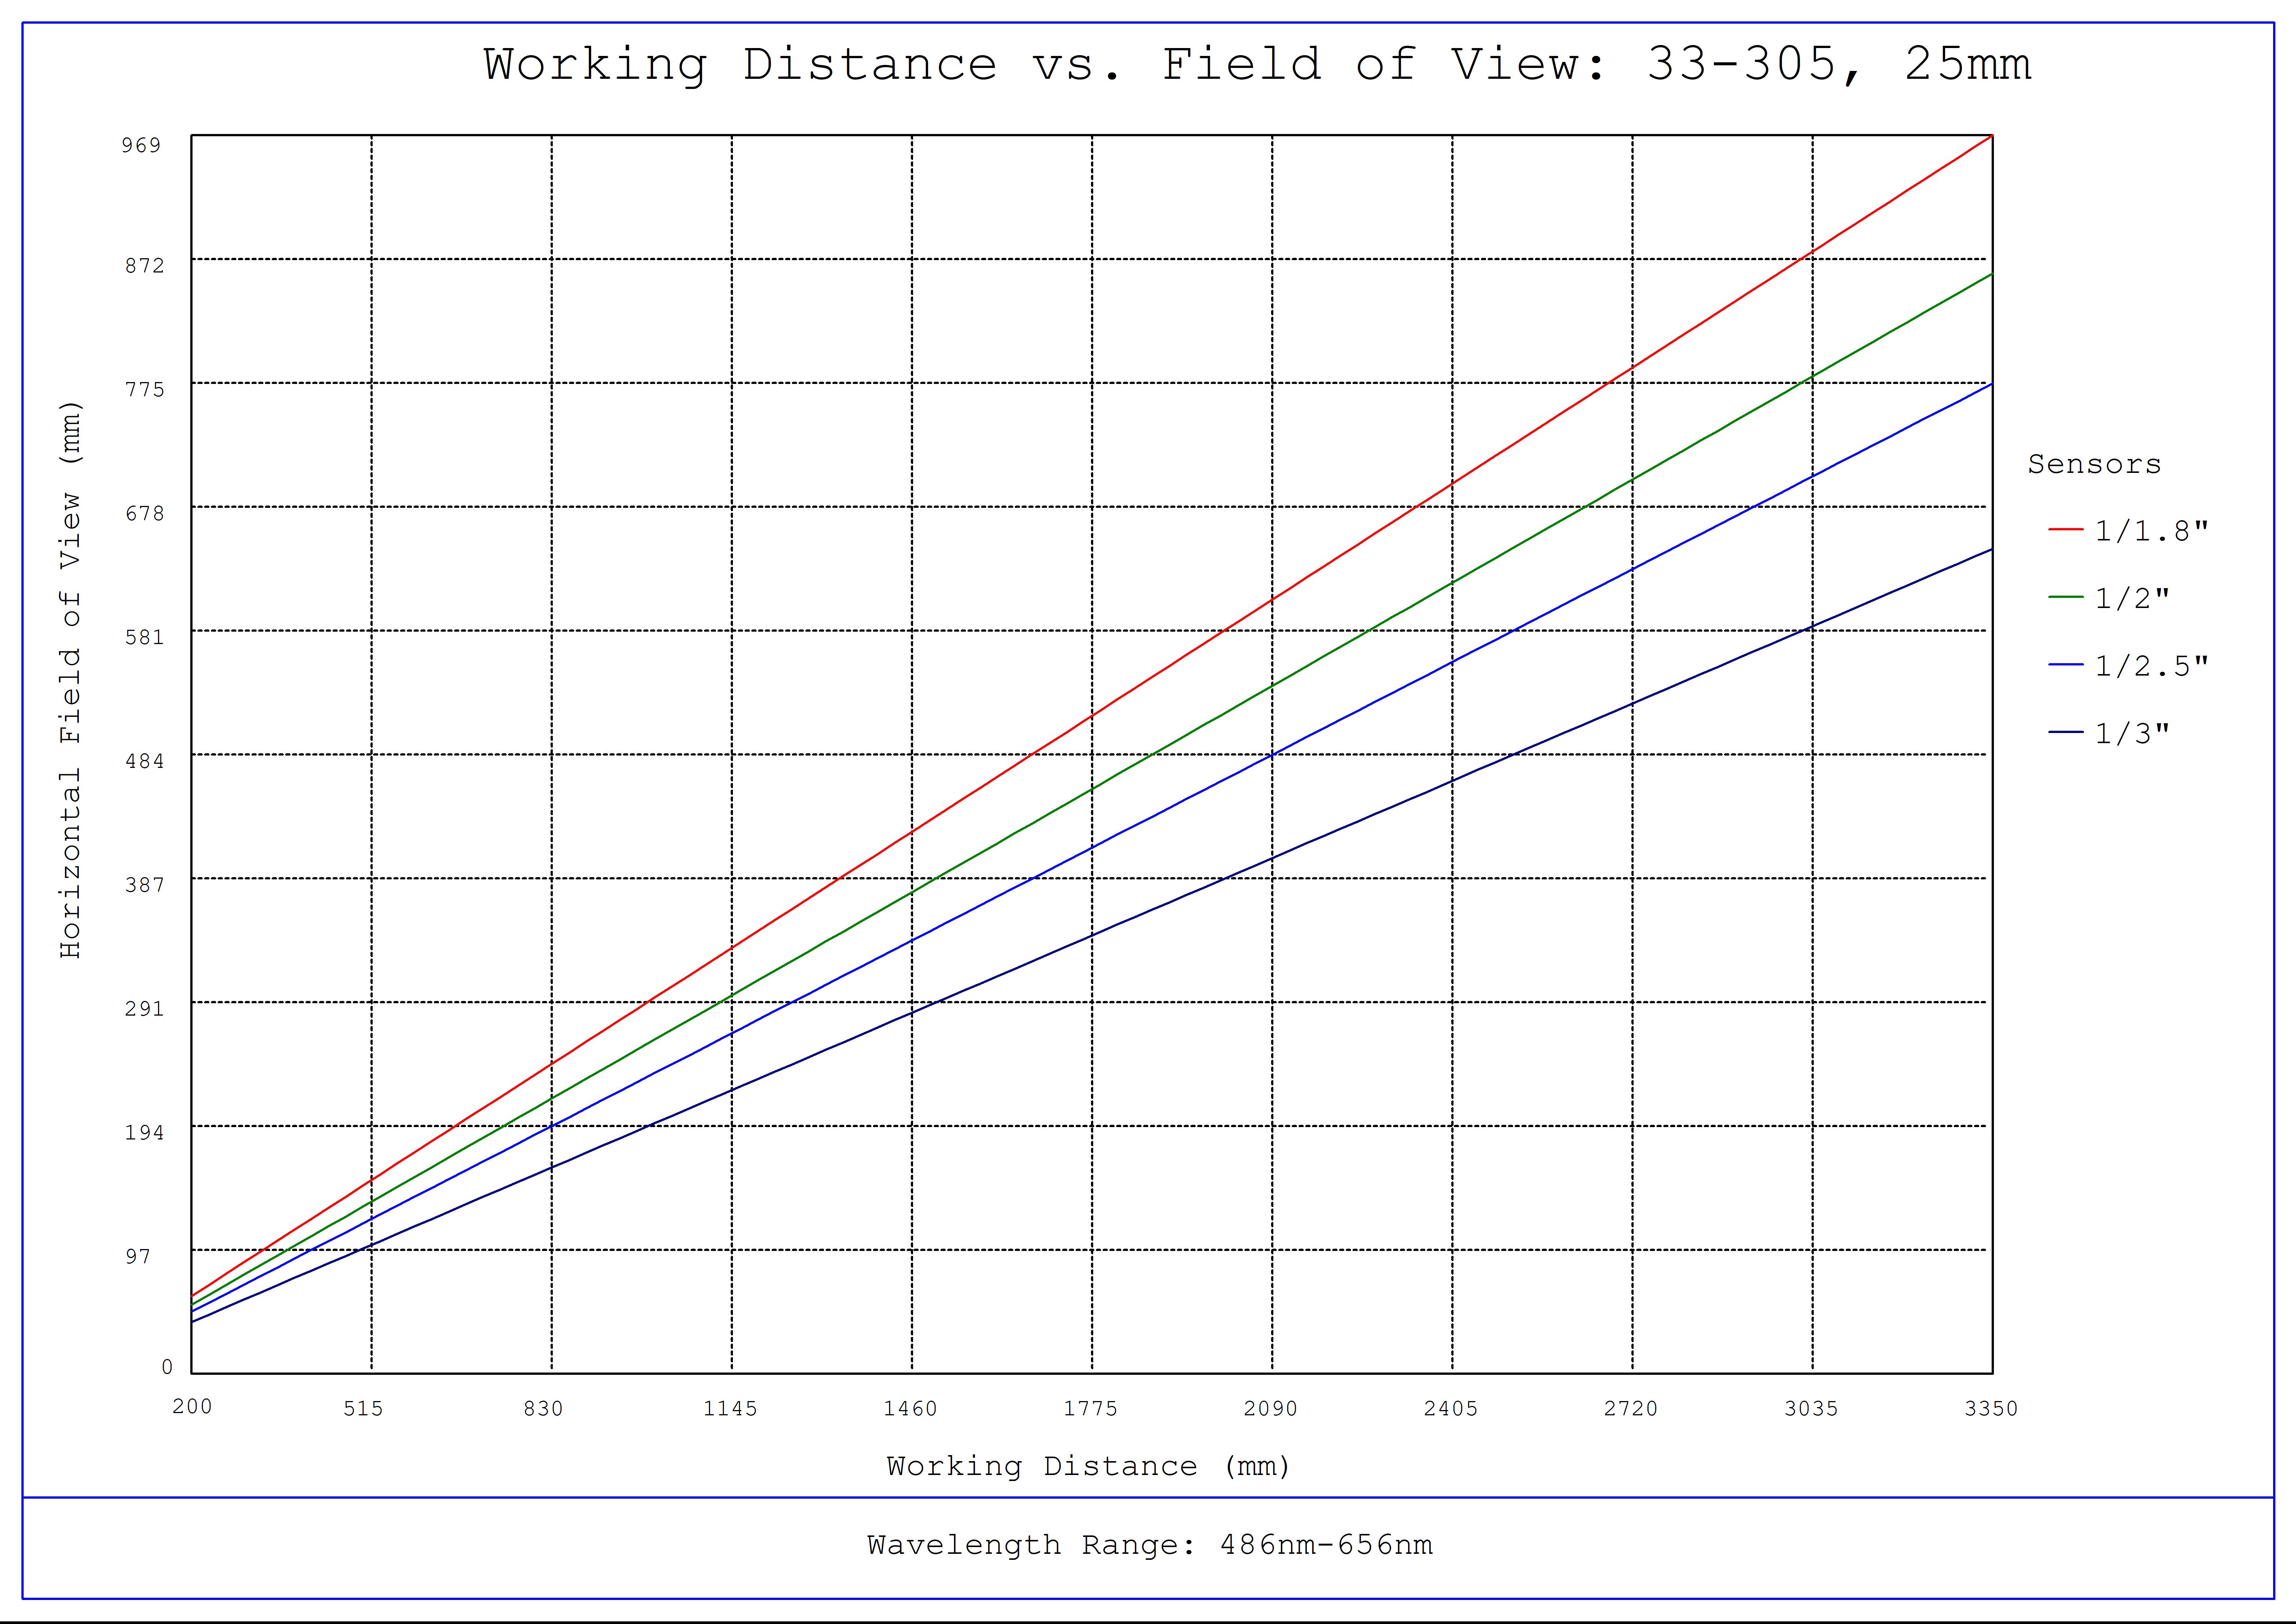 #33-305, 25mm UC Series Fixed Focal Length Lens, Working Distance versus Field of View Plot